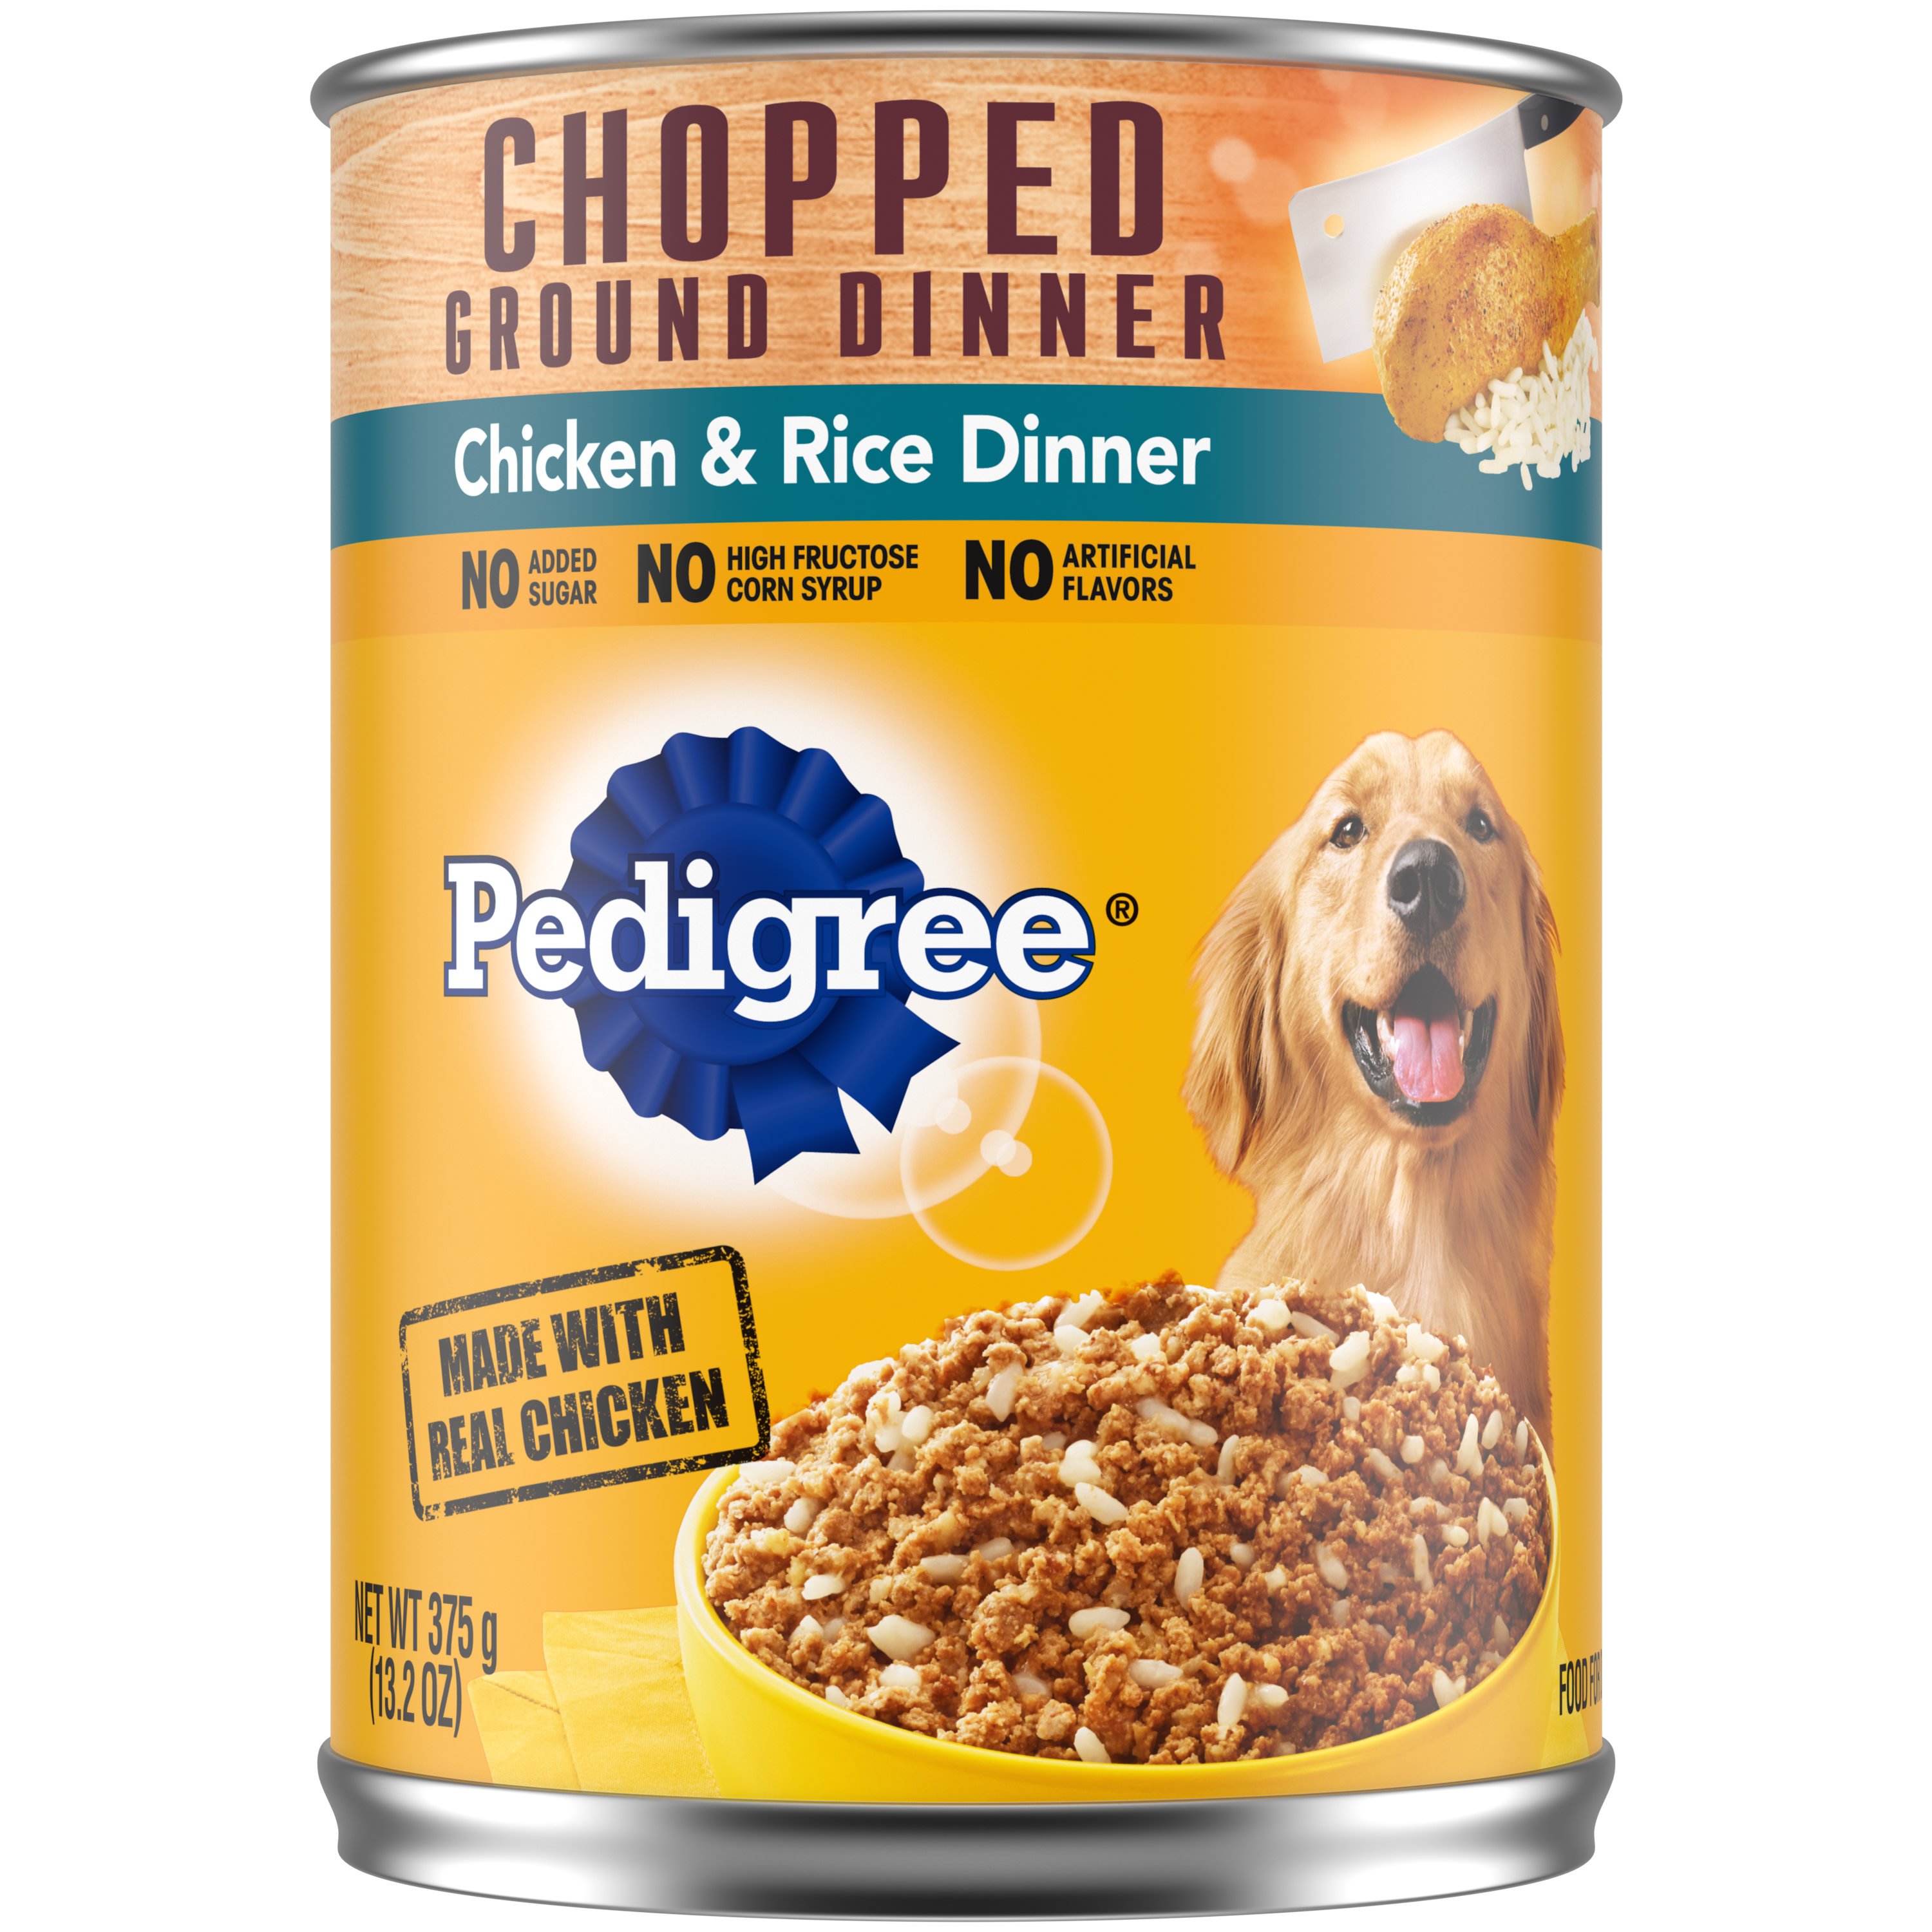 Pedigree Chopped Ground Dinner Chicken And Rice Wet Dog Food Shop Dogs